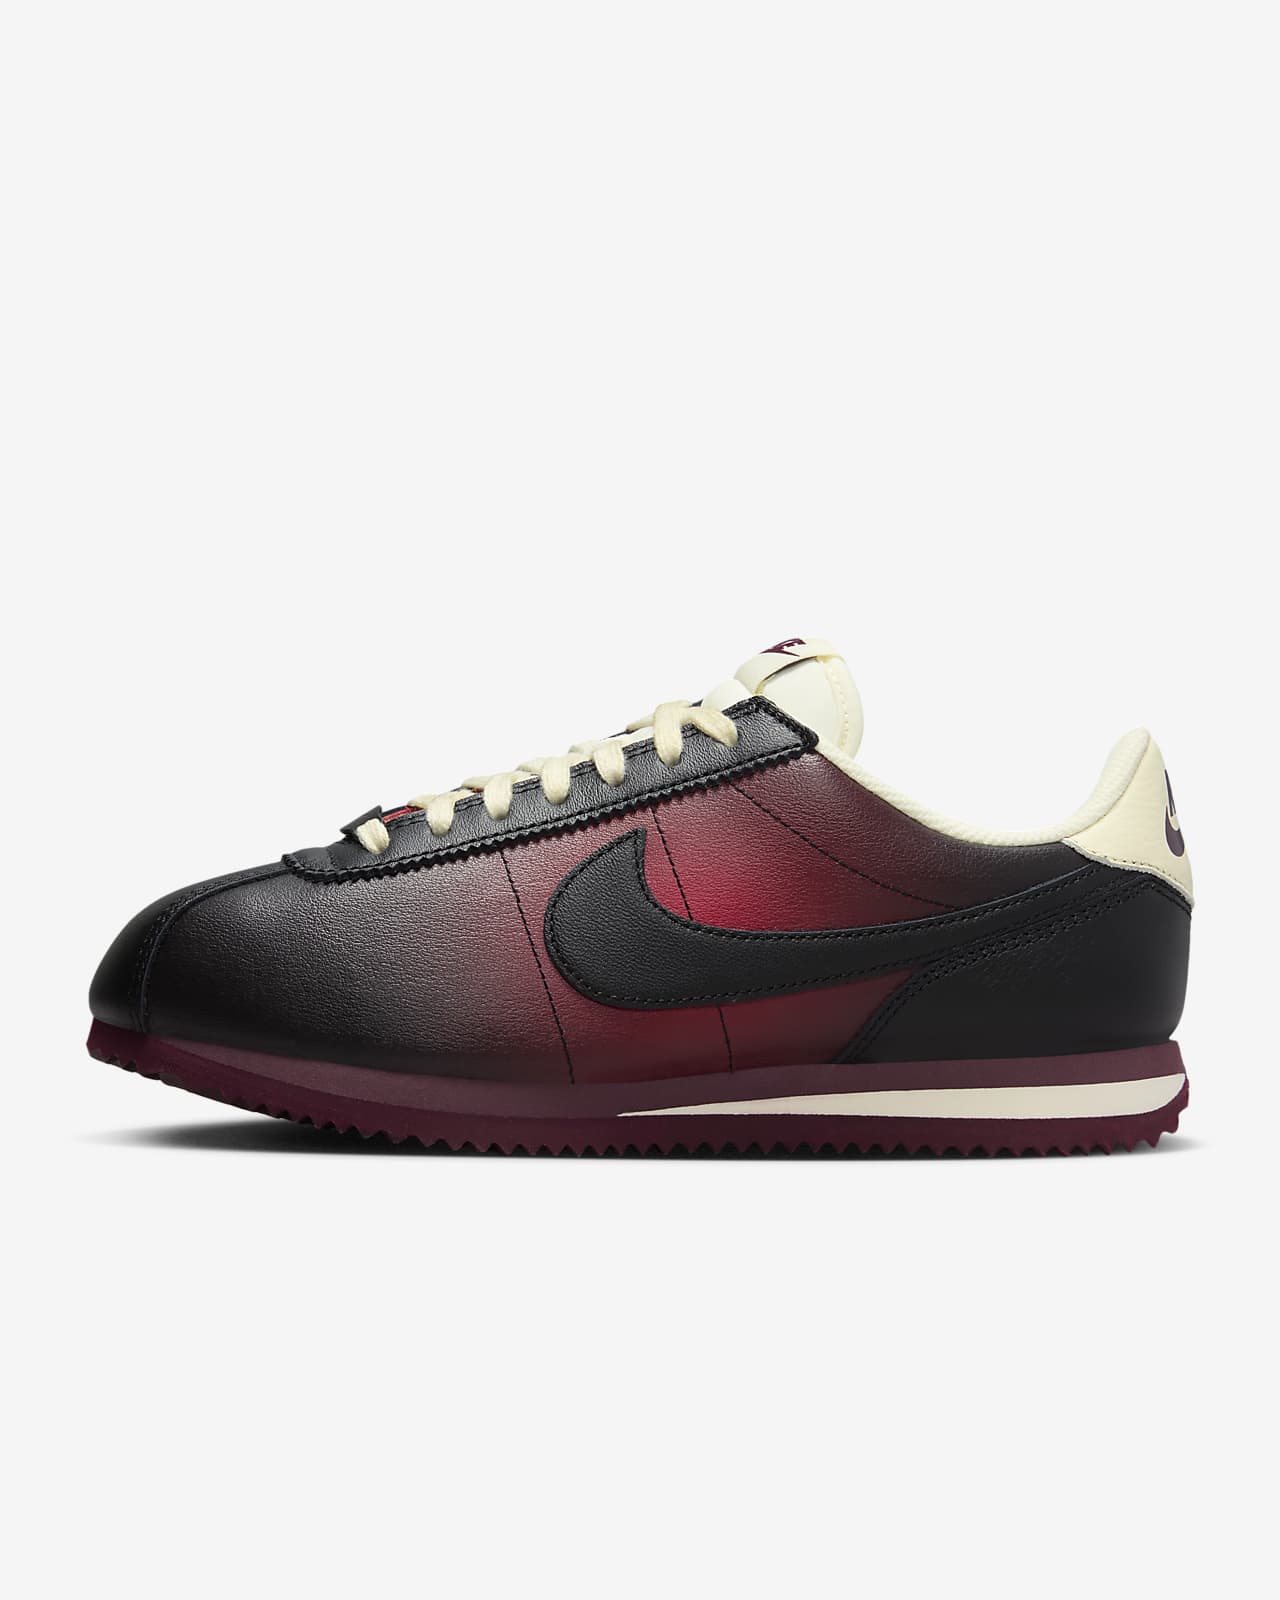 History Check - 45 Years of Nike Cortez